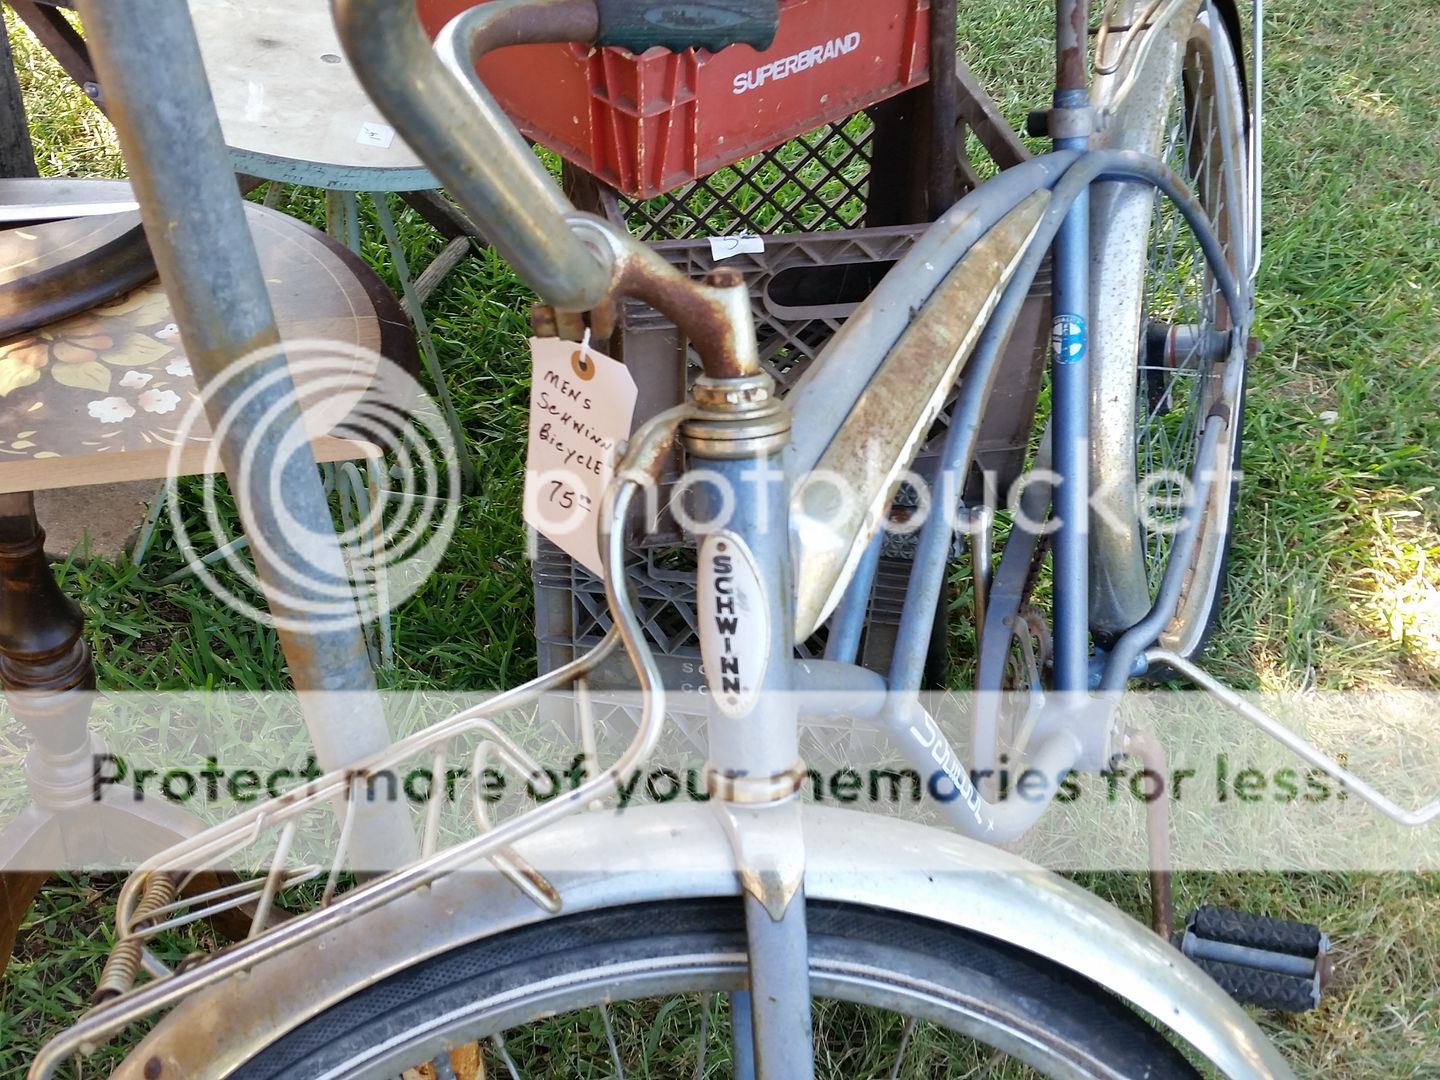 vintage huffy bicycles identification